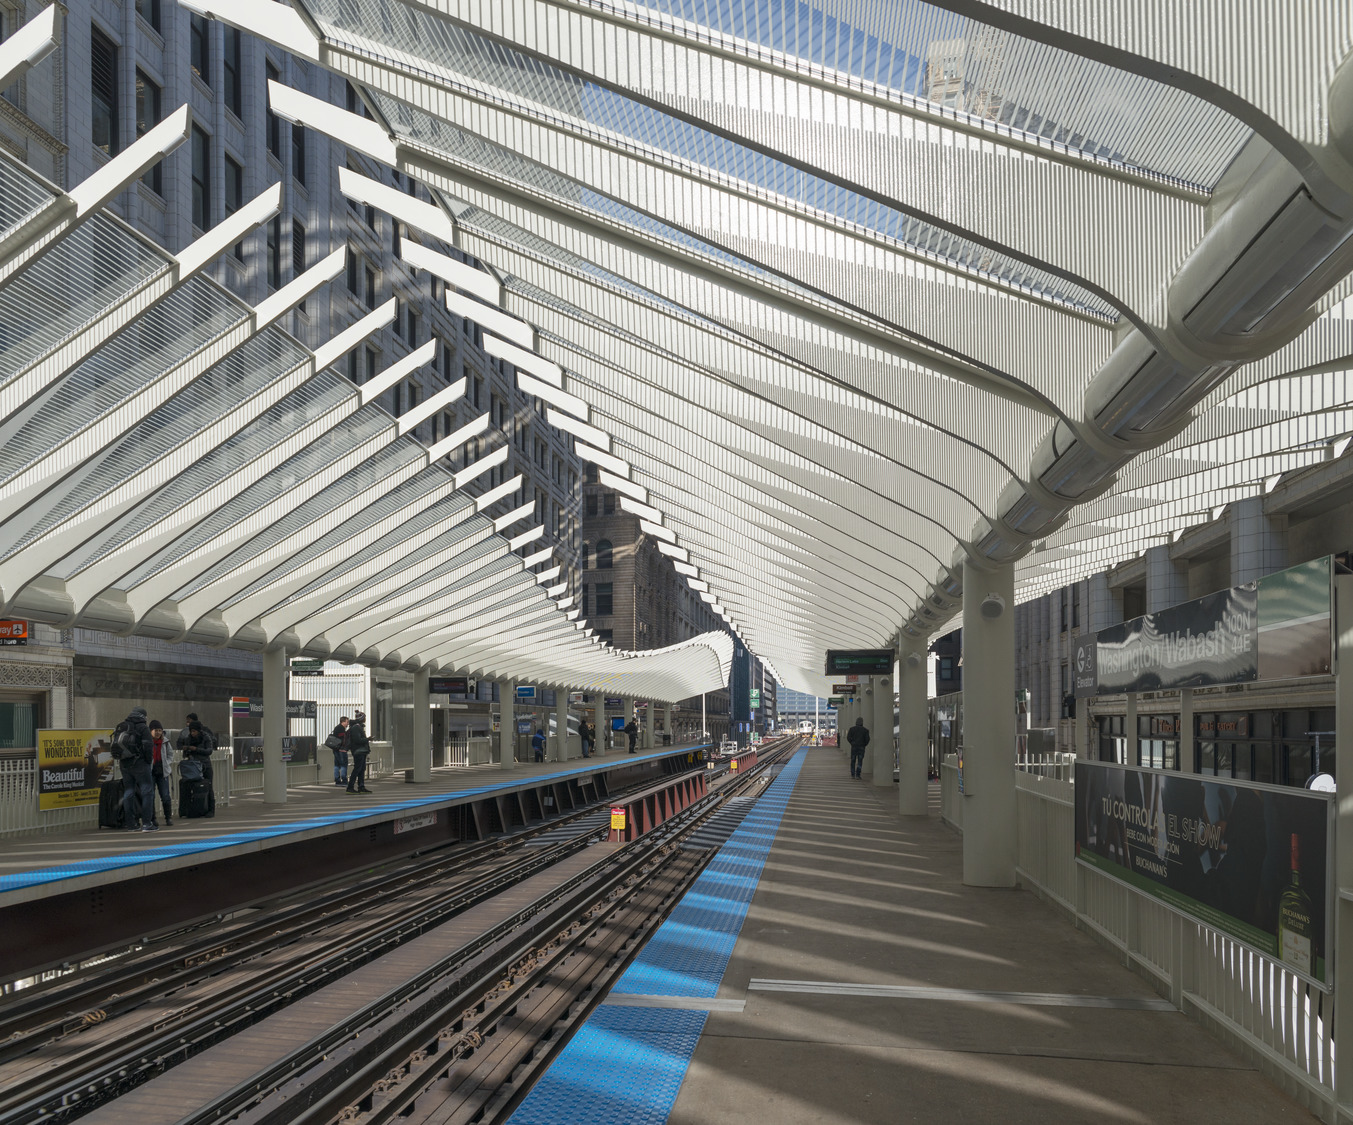 An artist's rendering of a train station design.